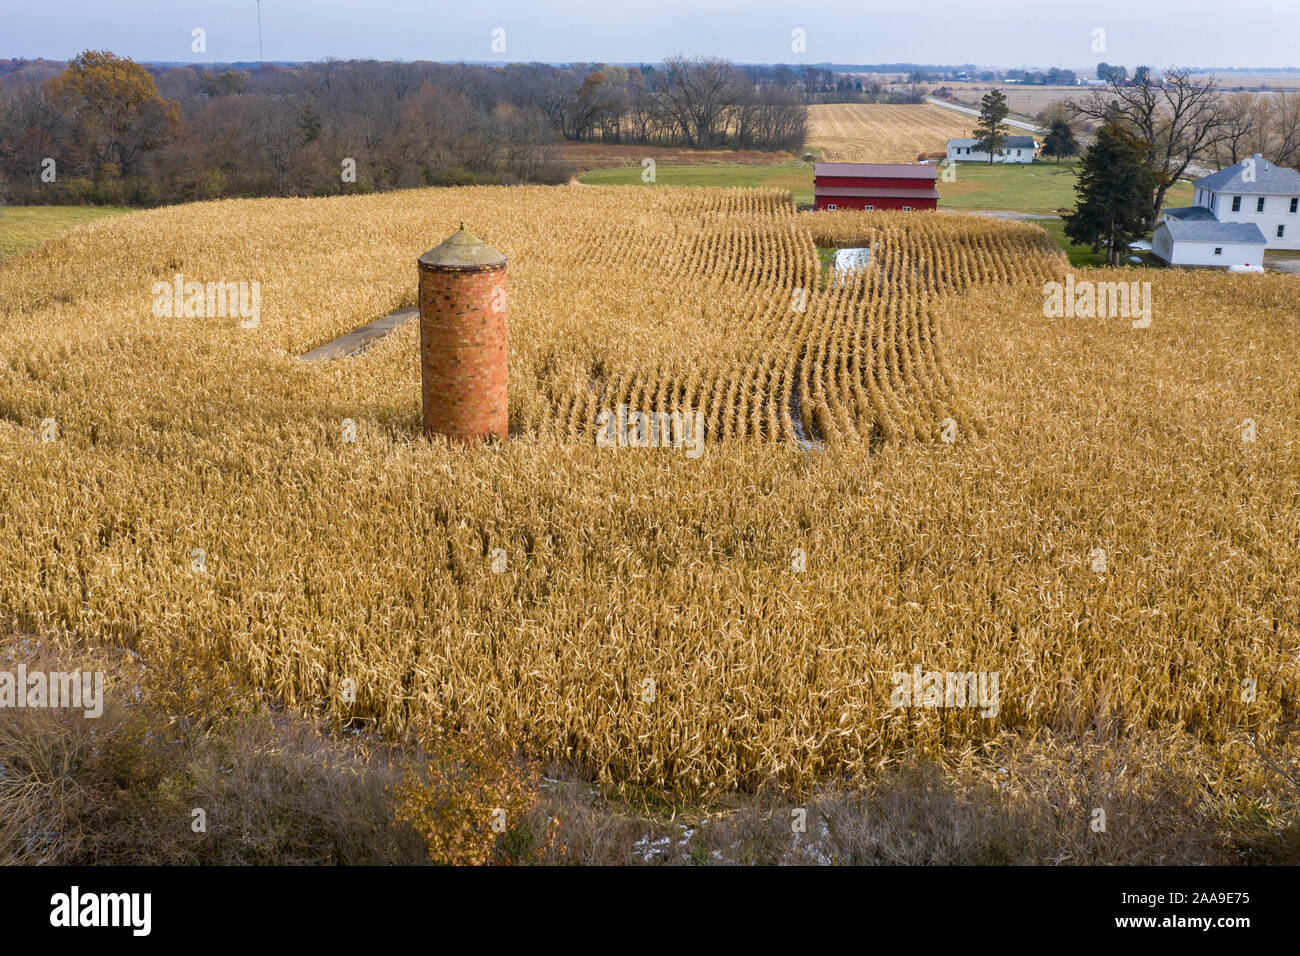 Illinois City, Illinois - An old brick silo stands in the middle of a corn field. Stock Photo